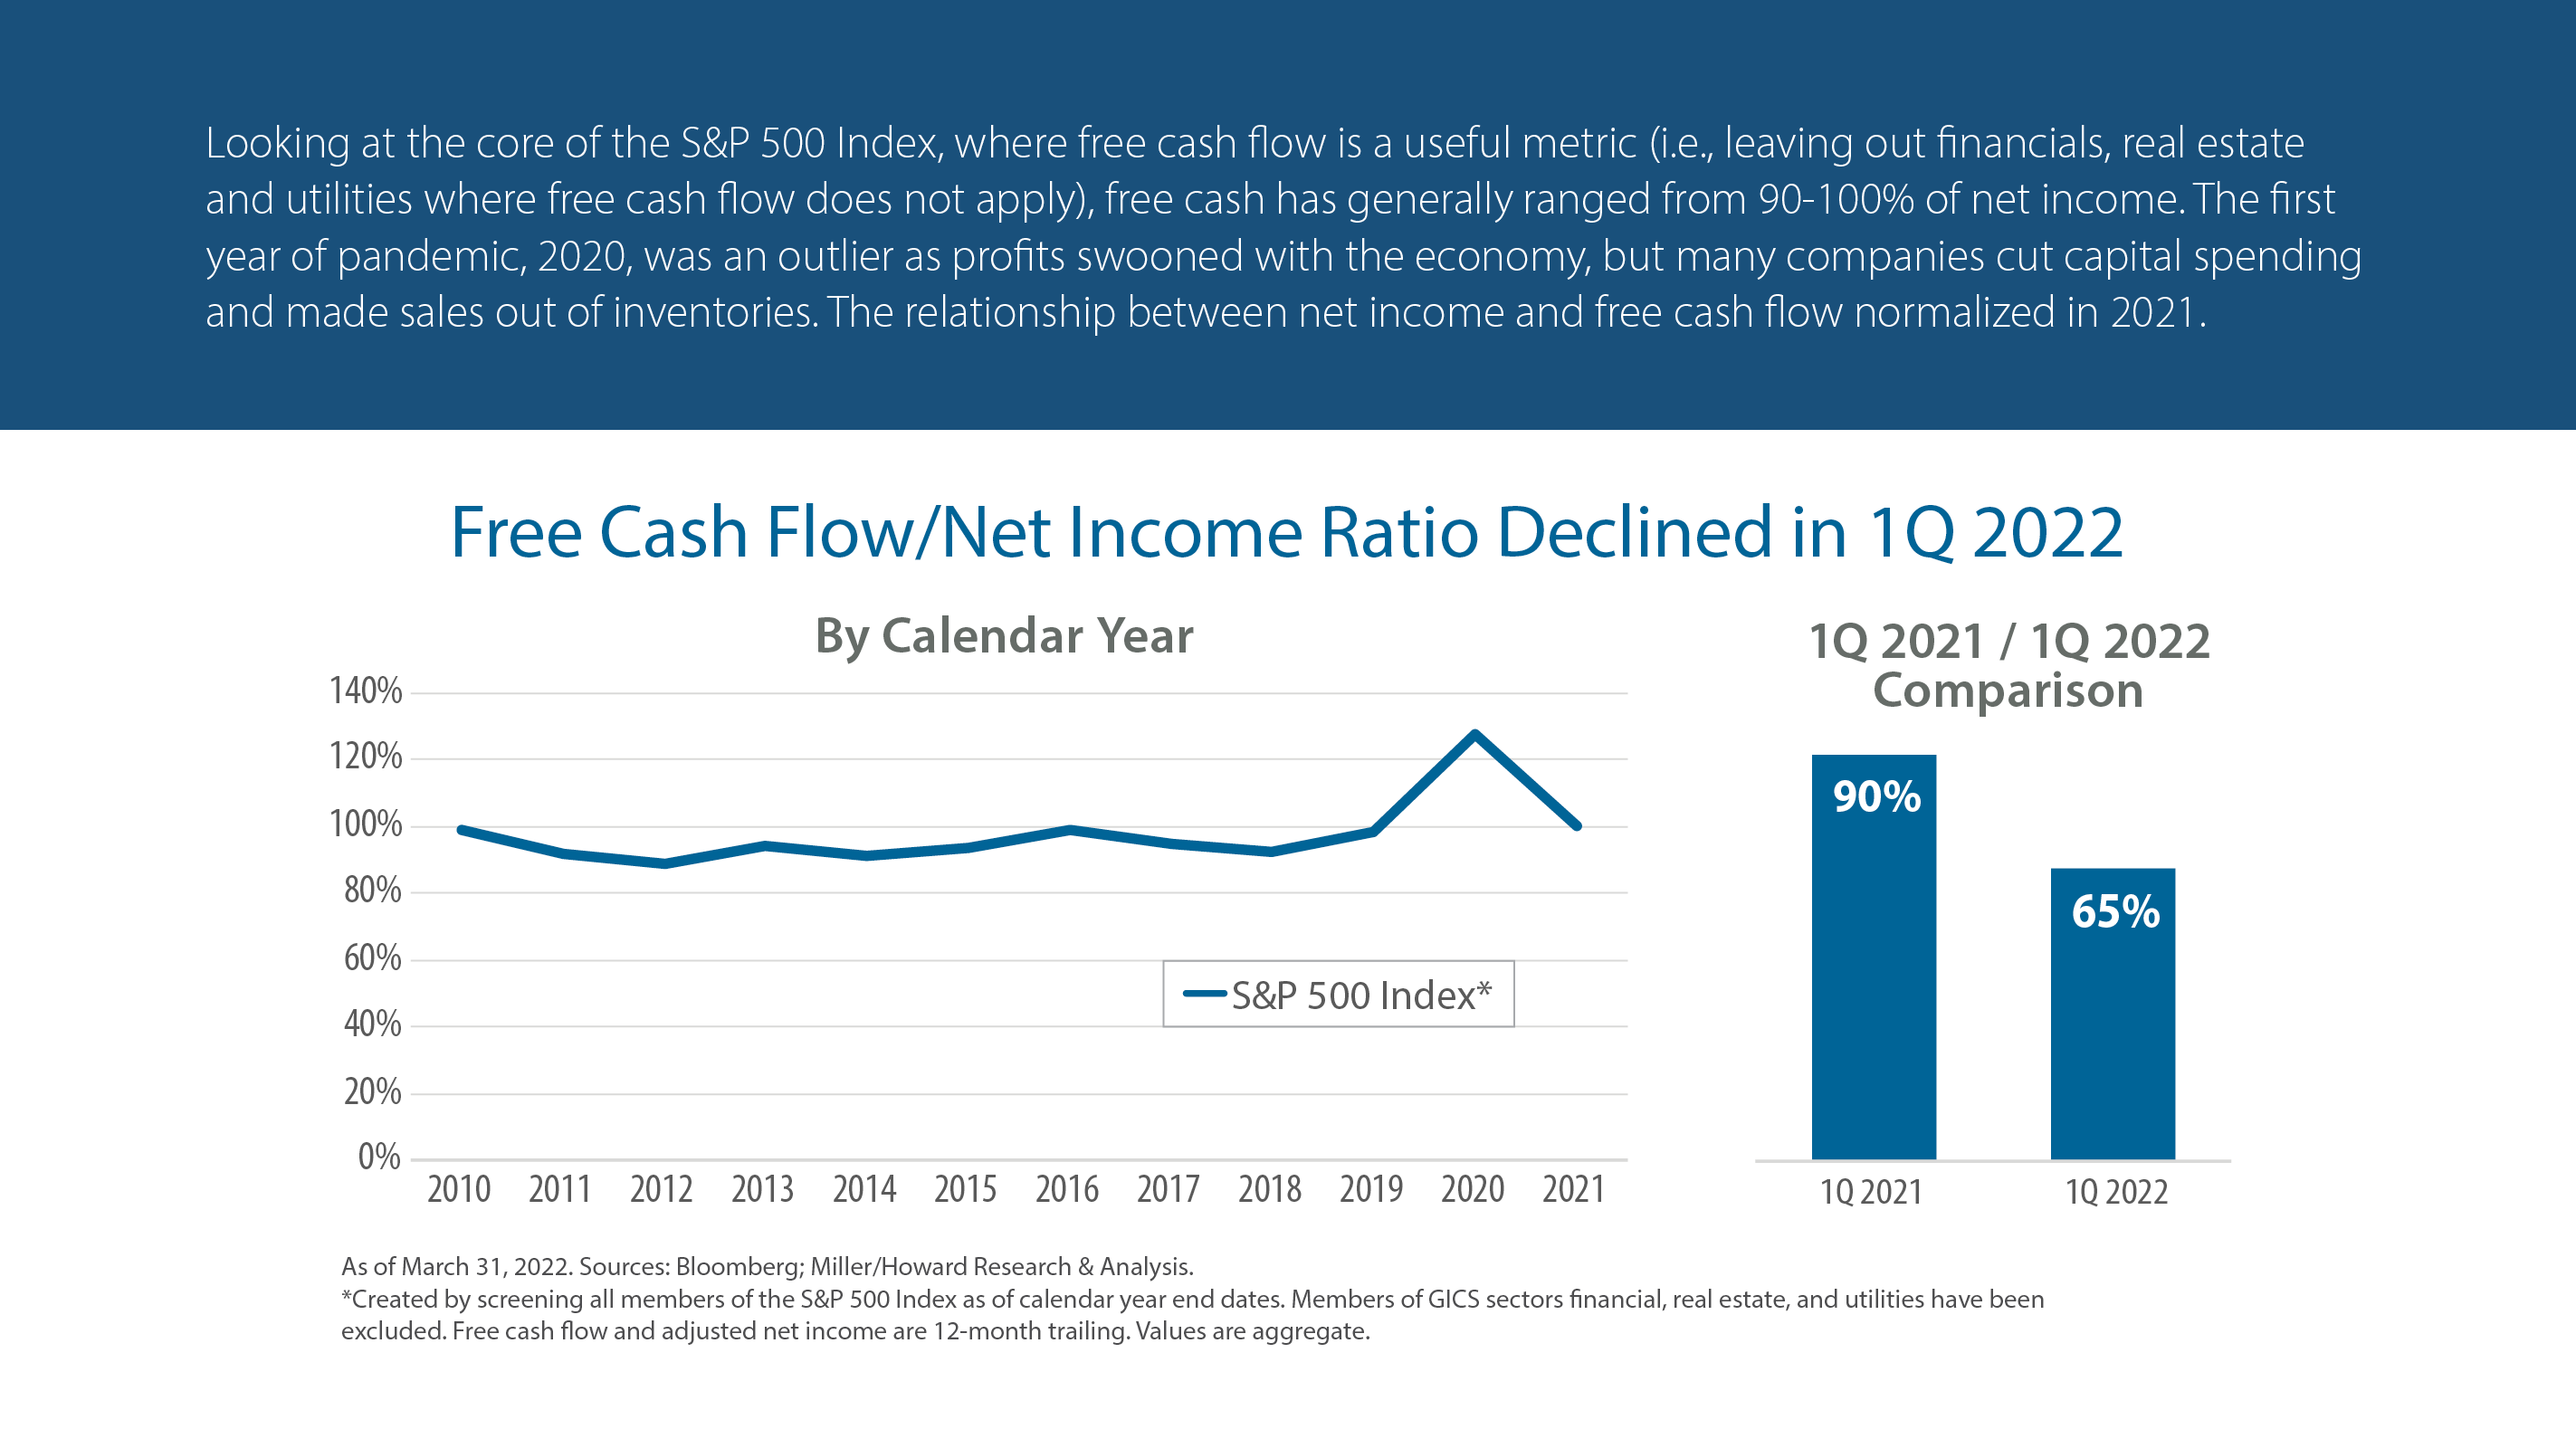 Free Cash Flow/Net Income Ratio Declined in 1Q 2022